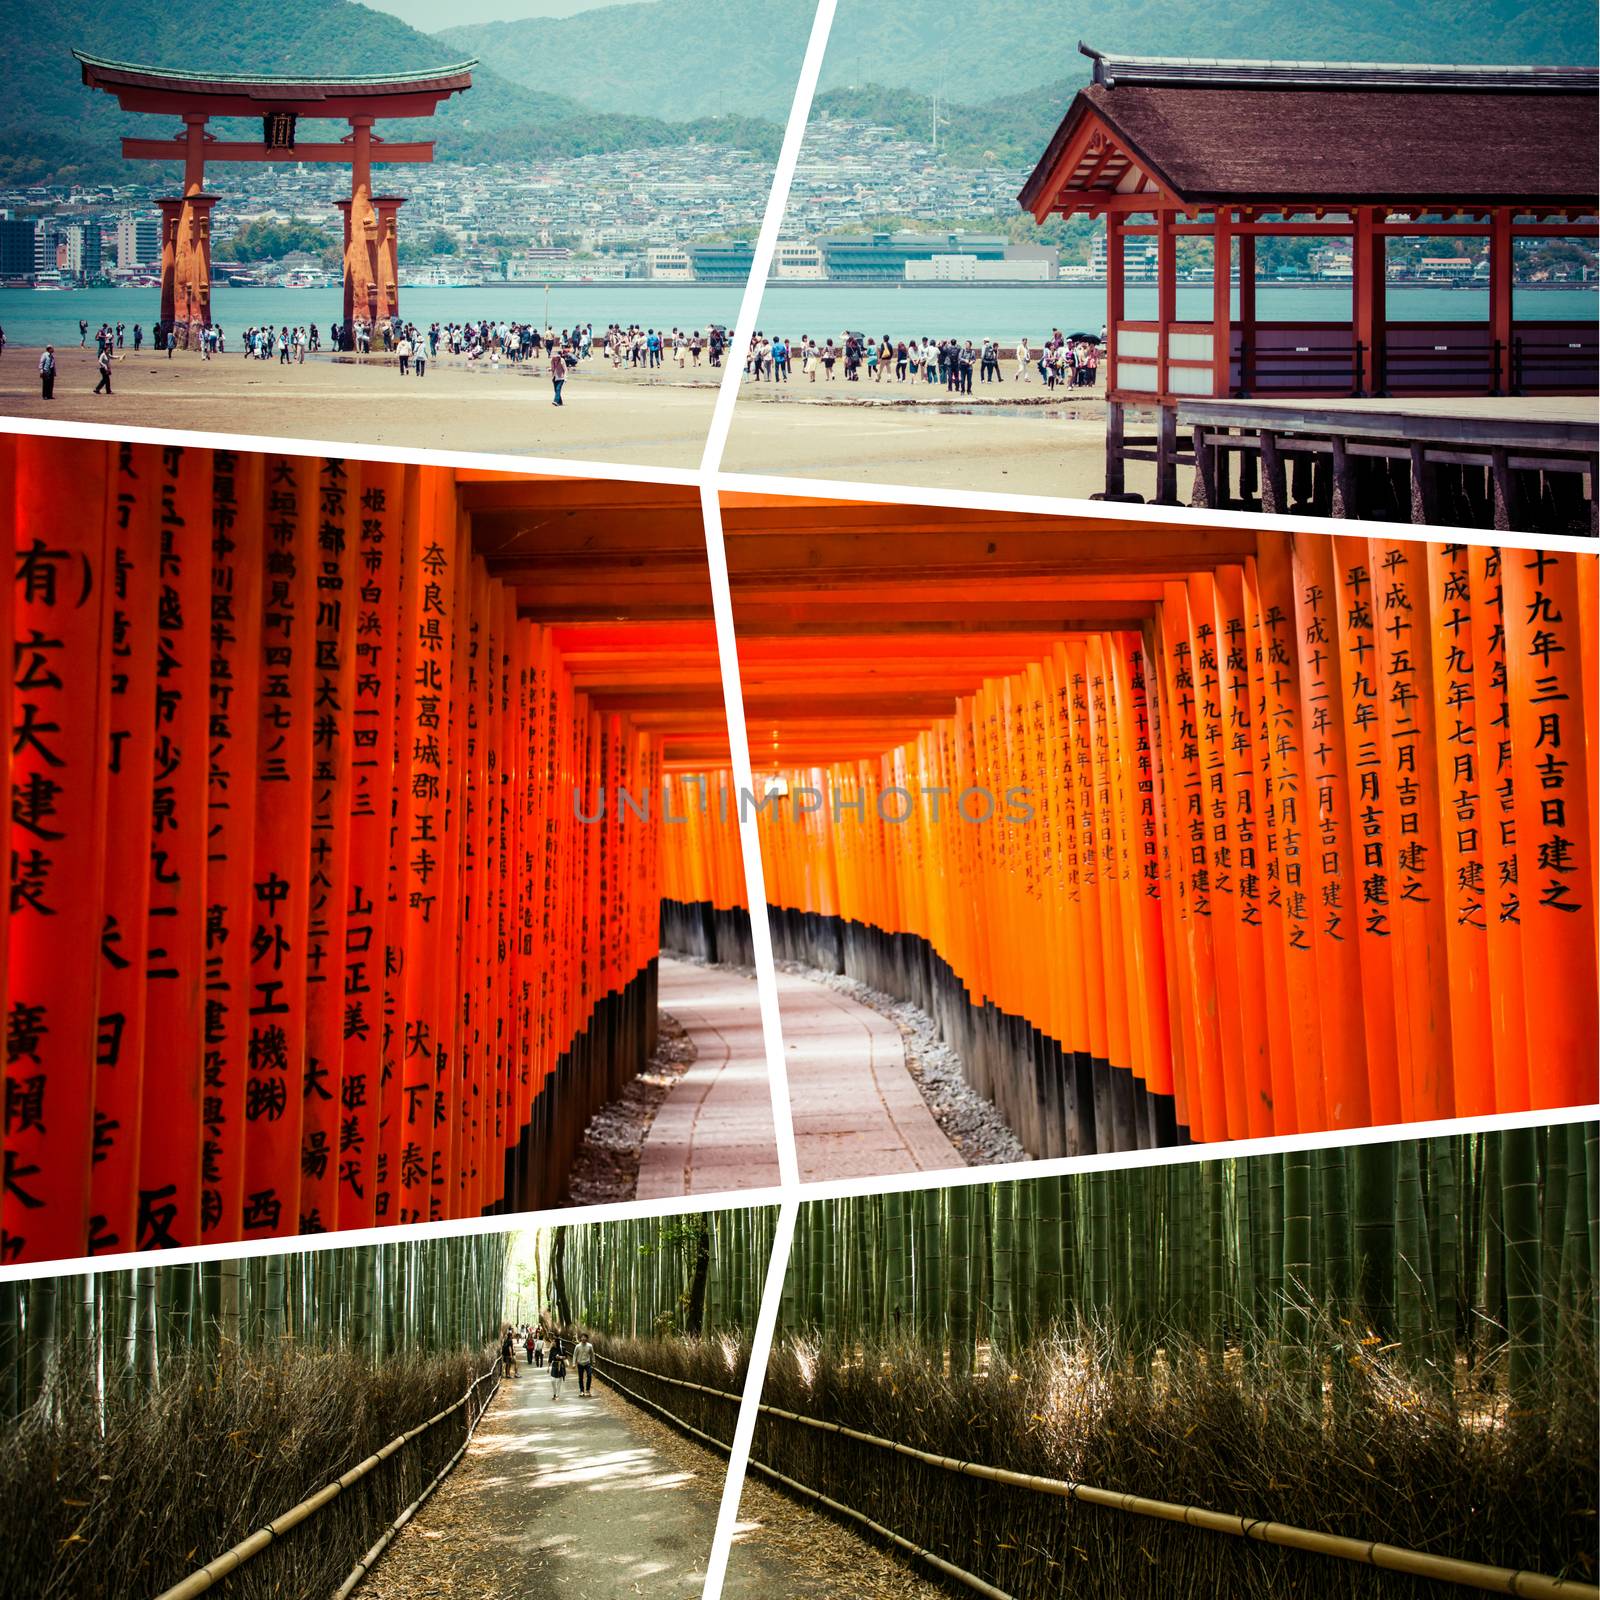 Collage of Japan images - travel background (my photos)

